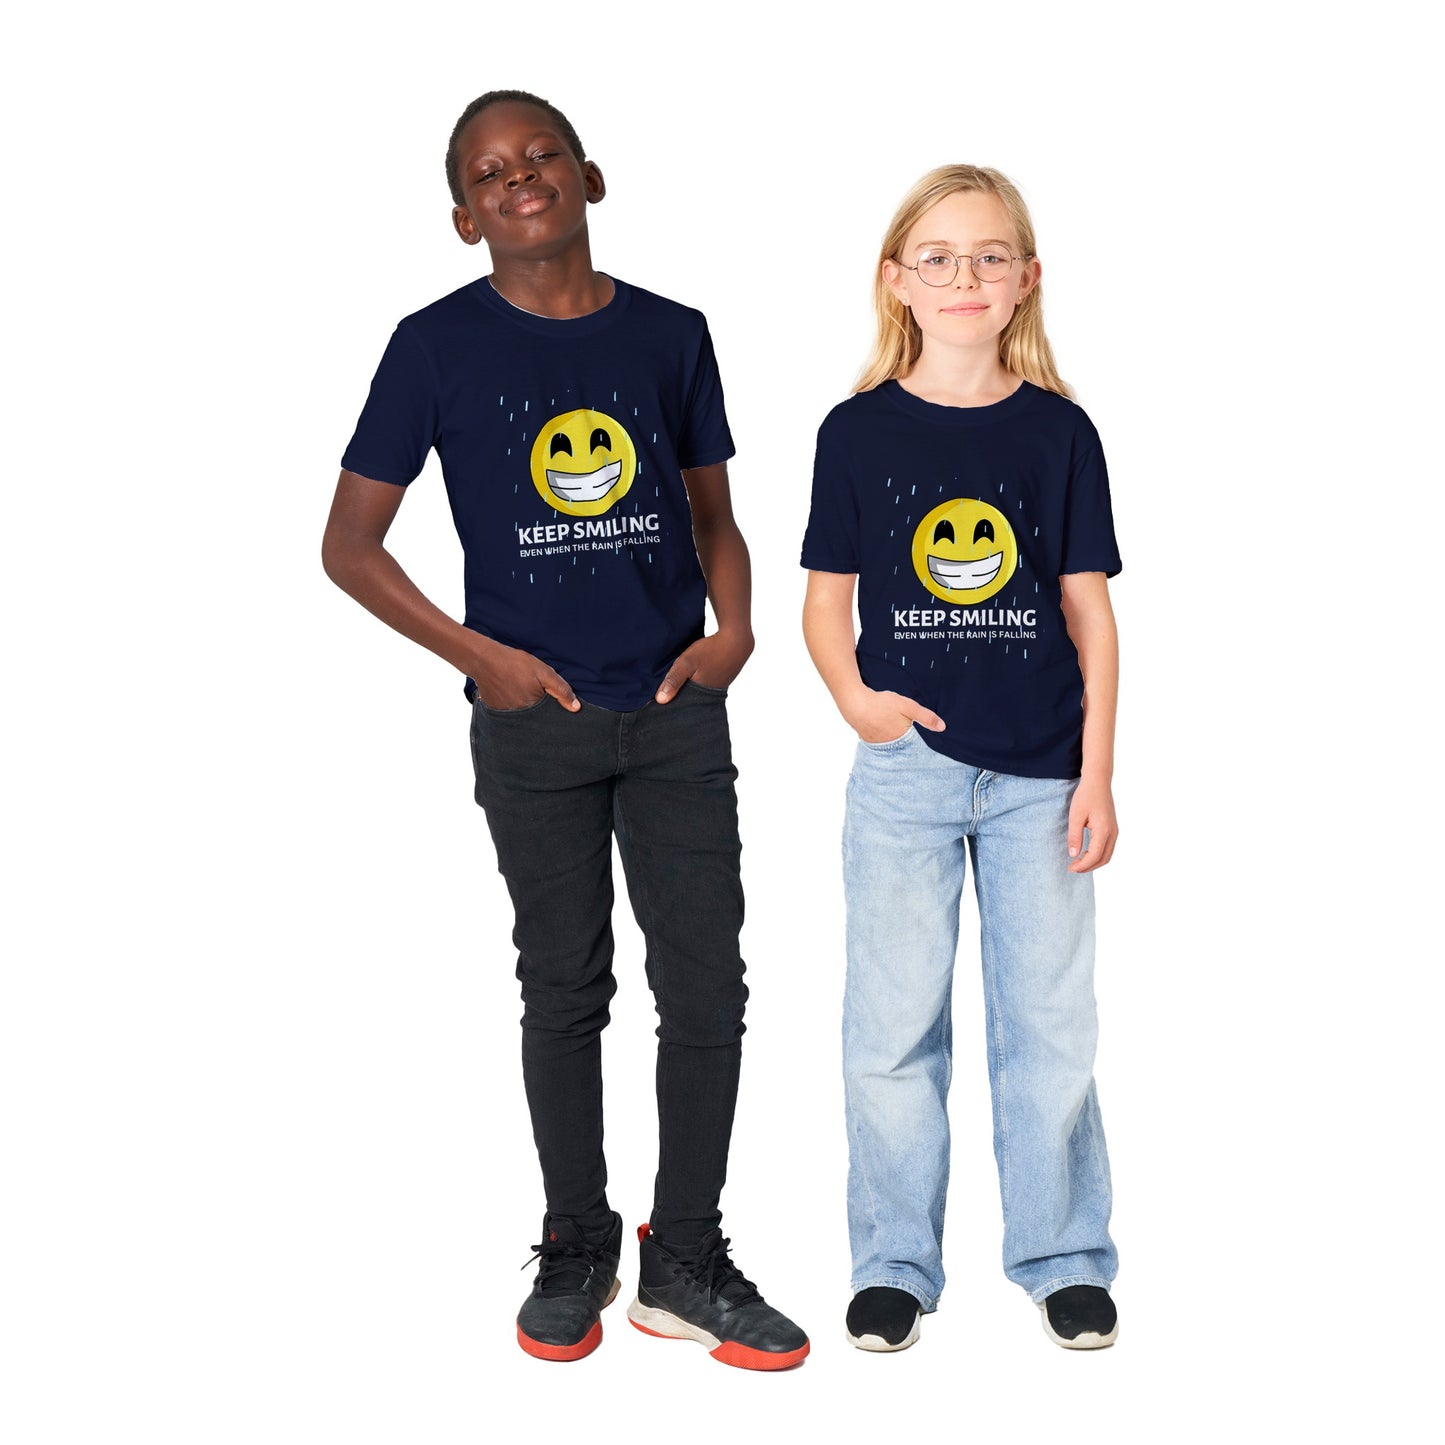 Inspirational Kids T-shirt: "I Keep Smiling" - Fashion With Meaning